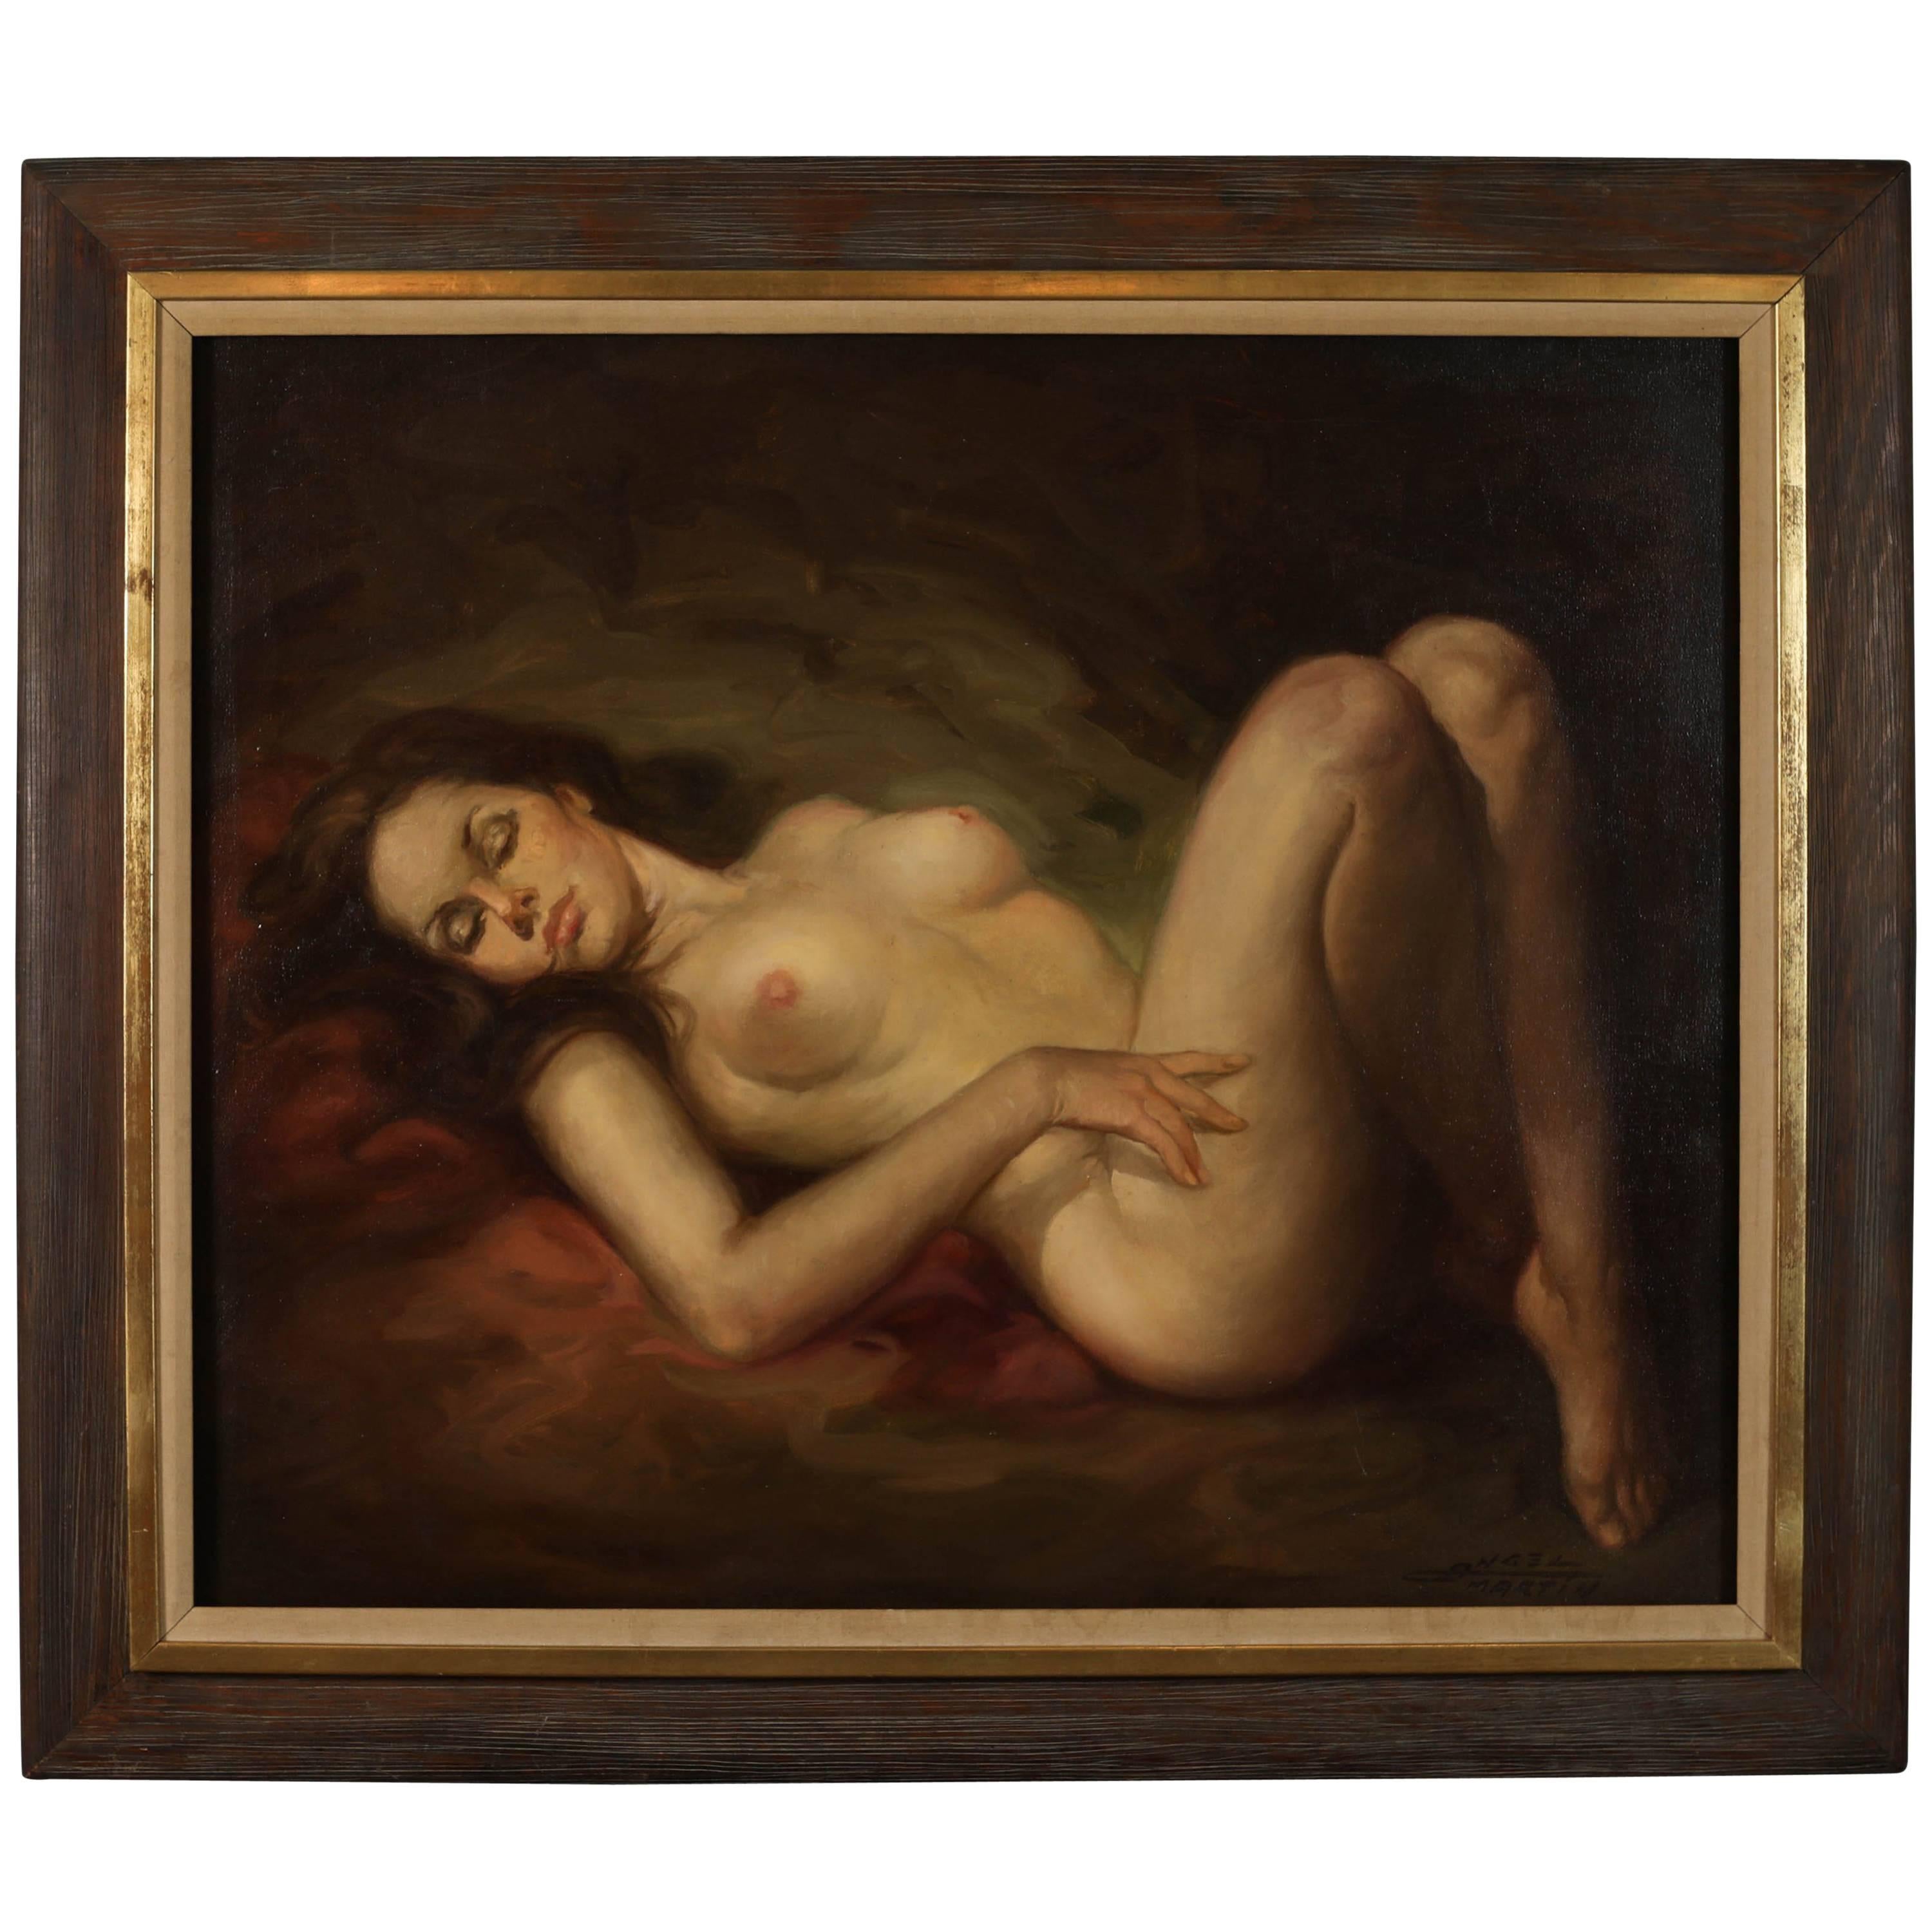 Oil Painting of Female Nude by Angel Martin: "Amanecer (Dawn)" 